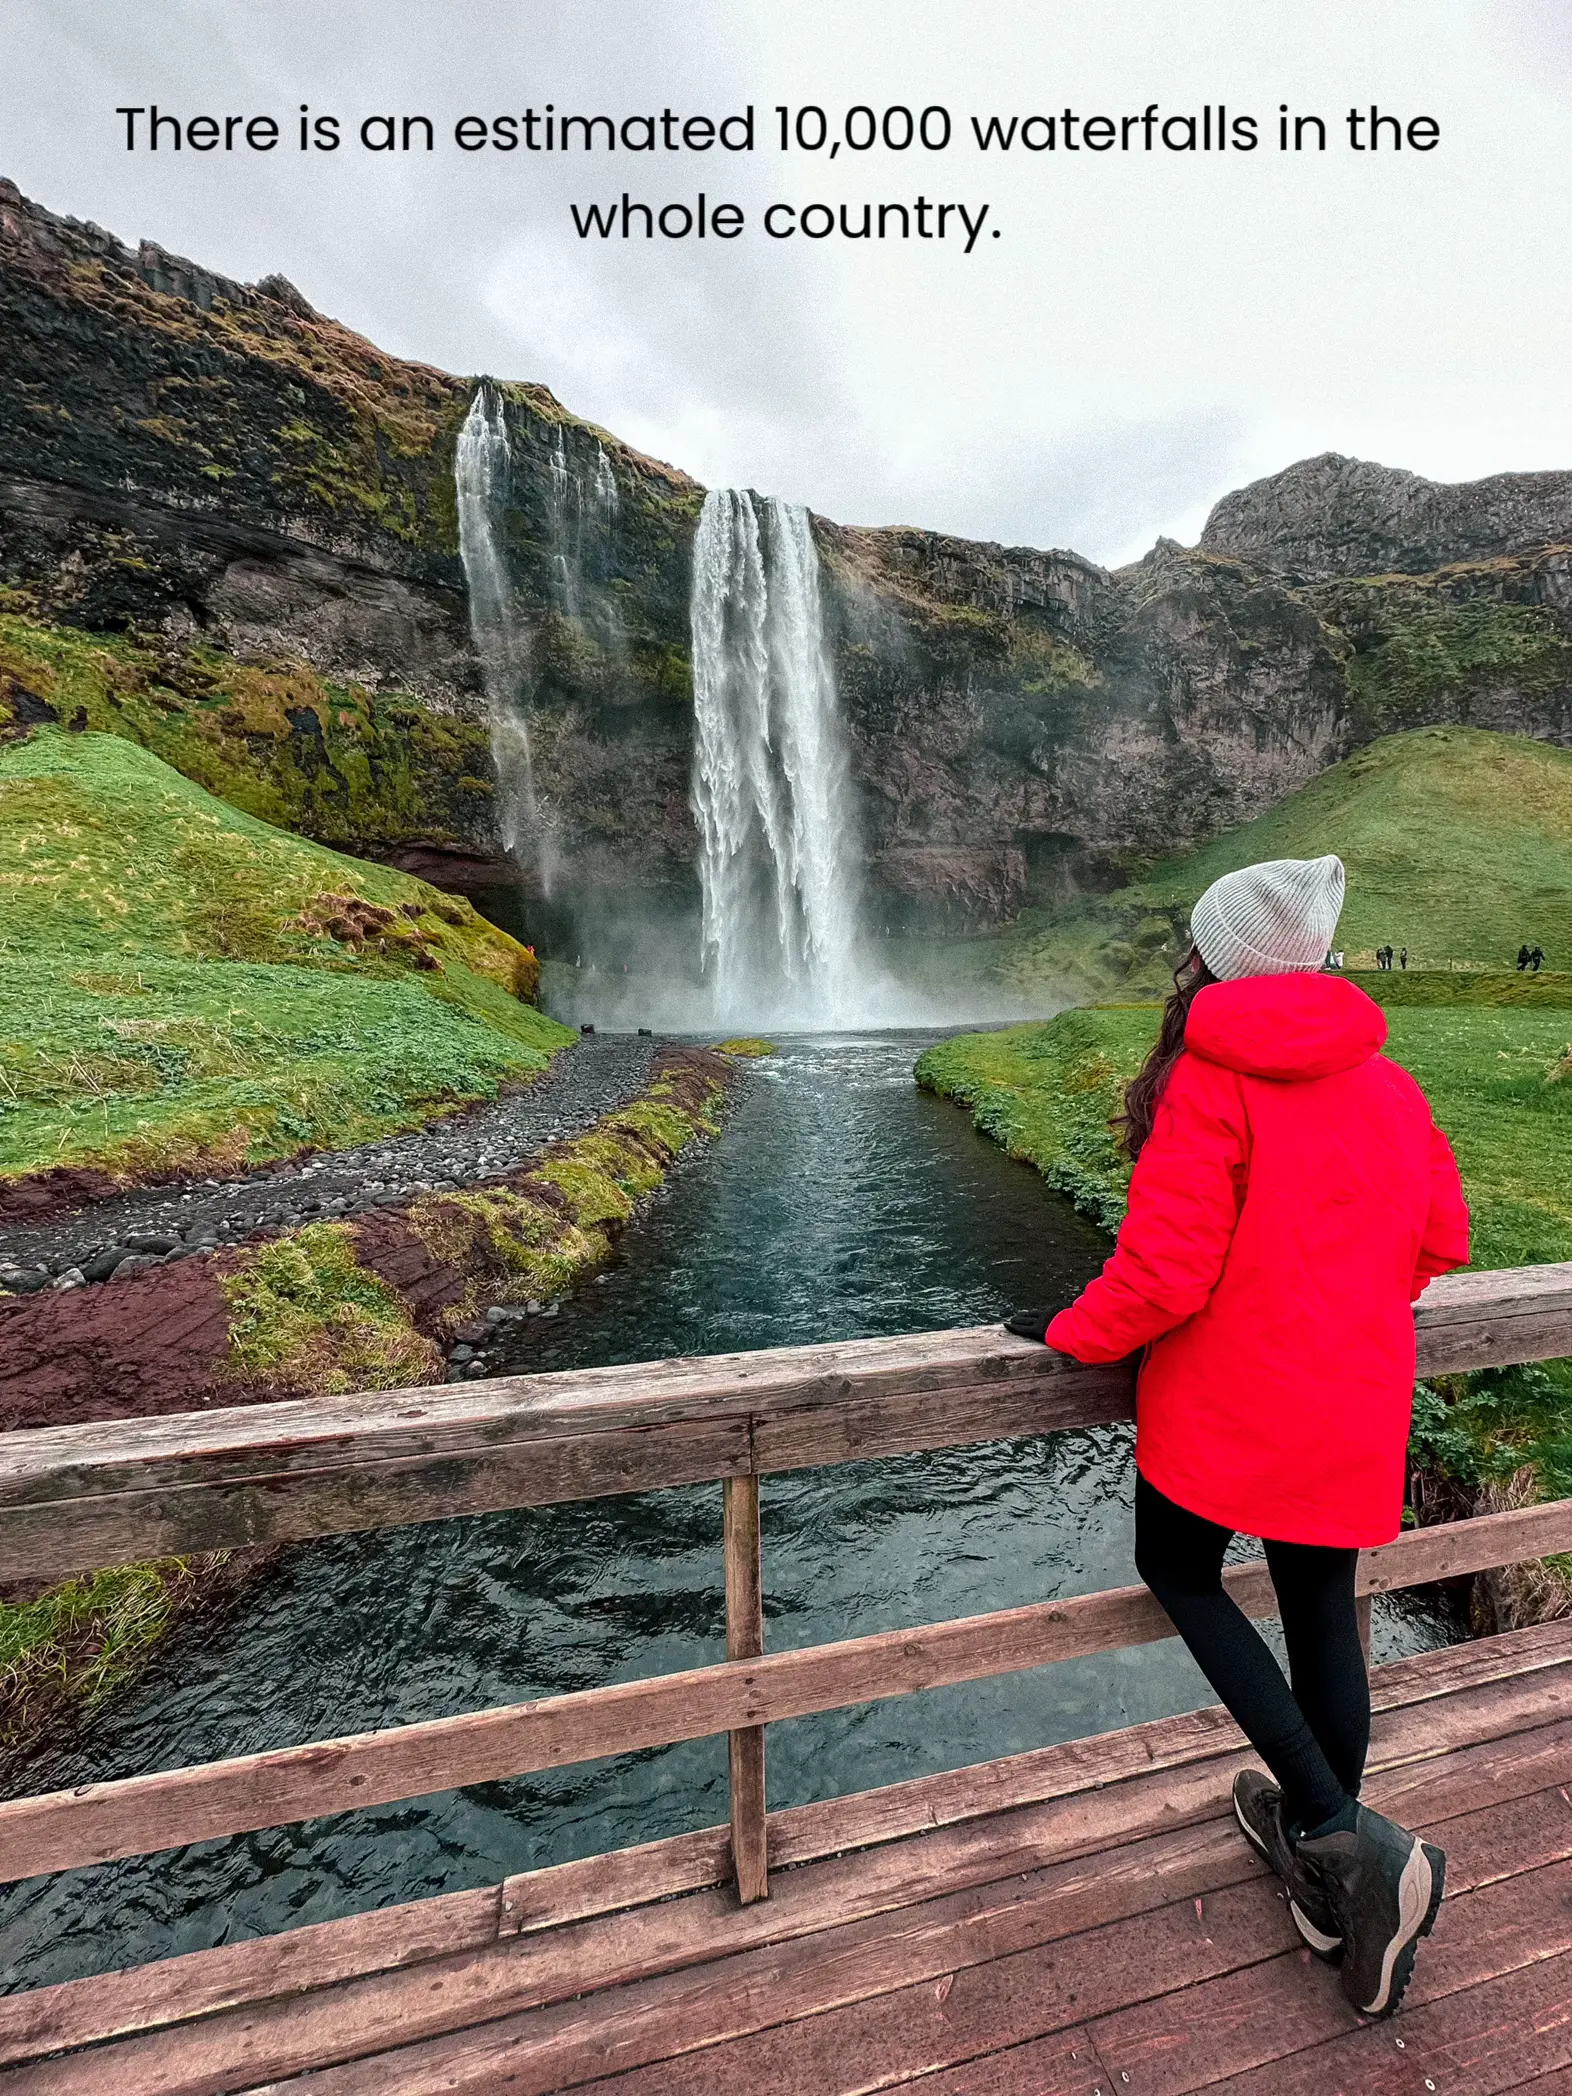 Recommended outdoor activities in Iceland - Lemon8 Search